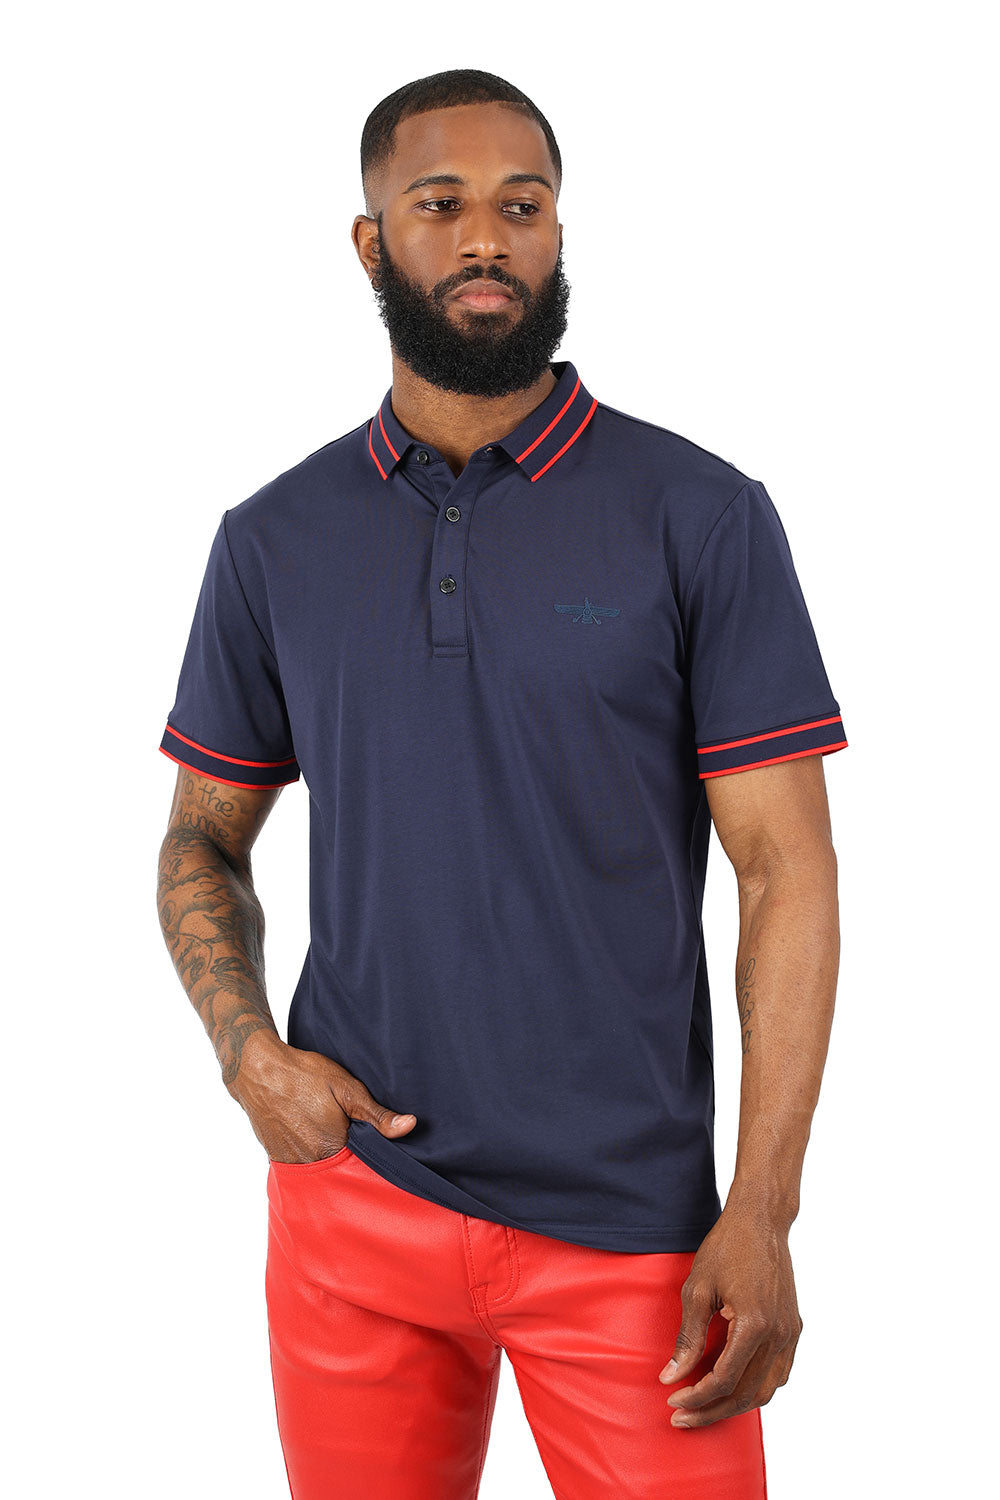 Barabas Men's Solid Color with Logo Polo Shirts 3PP832 Navy Red